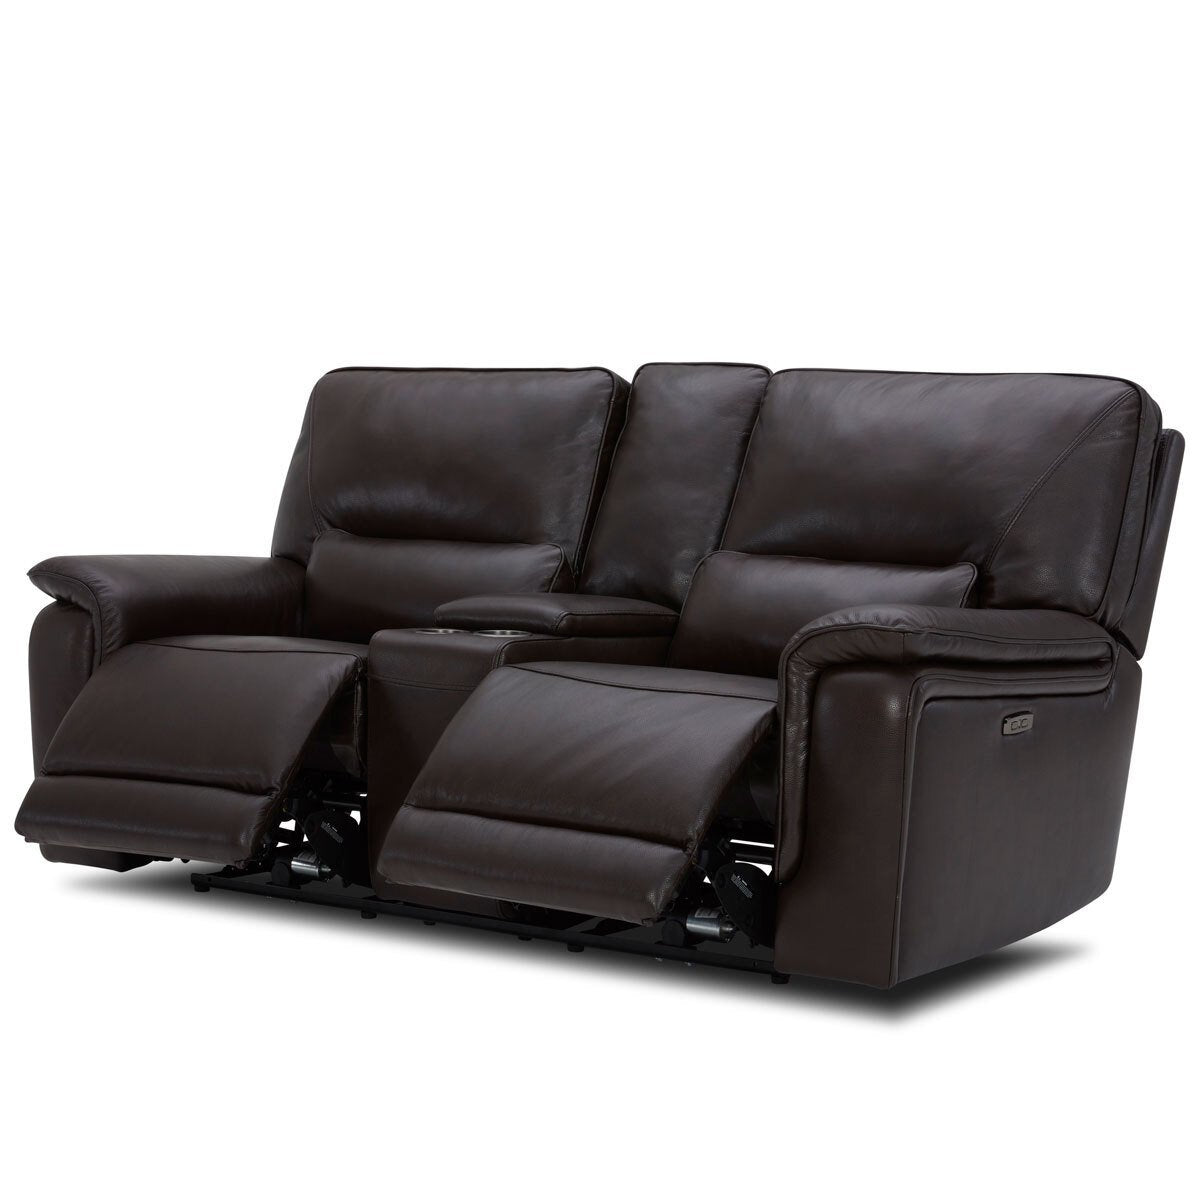 Gilman Creek Maxwell Brown Leather Power Recliner 2 Seater Sofa With Power Headrests - Signature Retail Stores